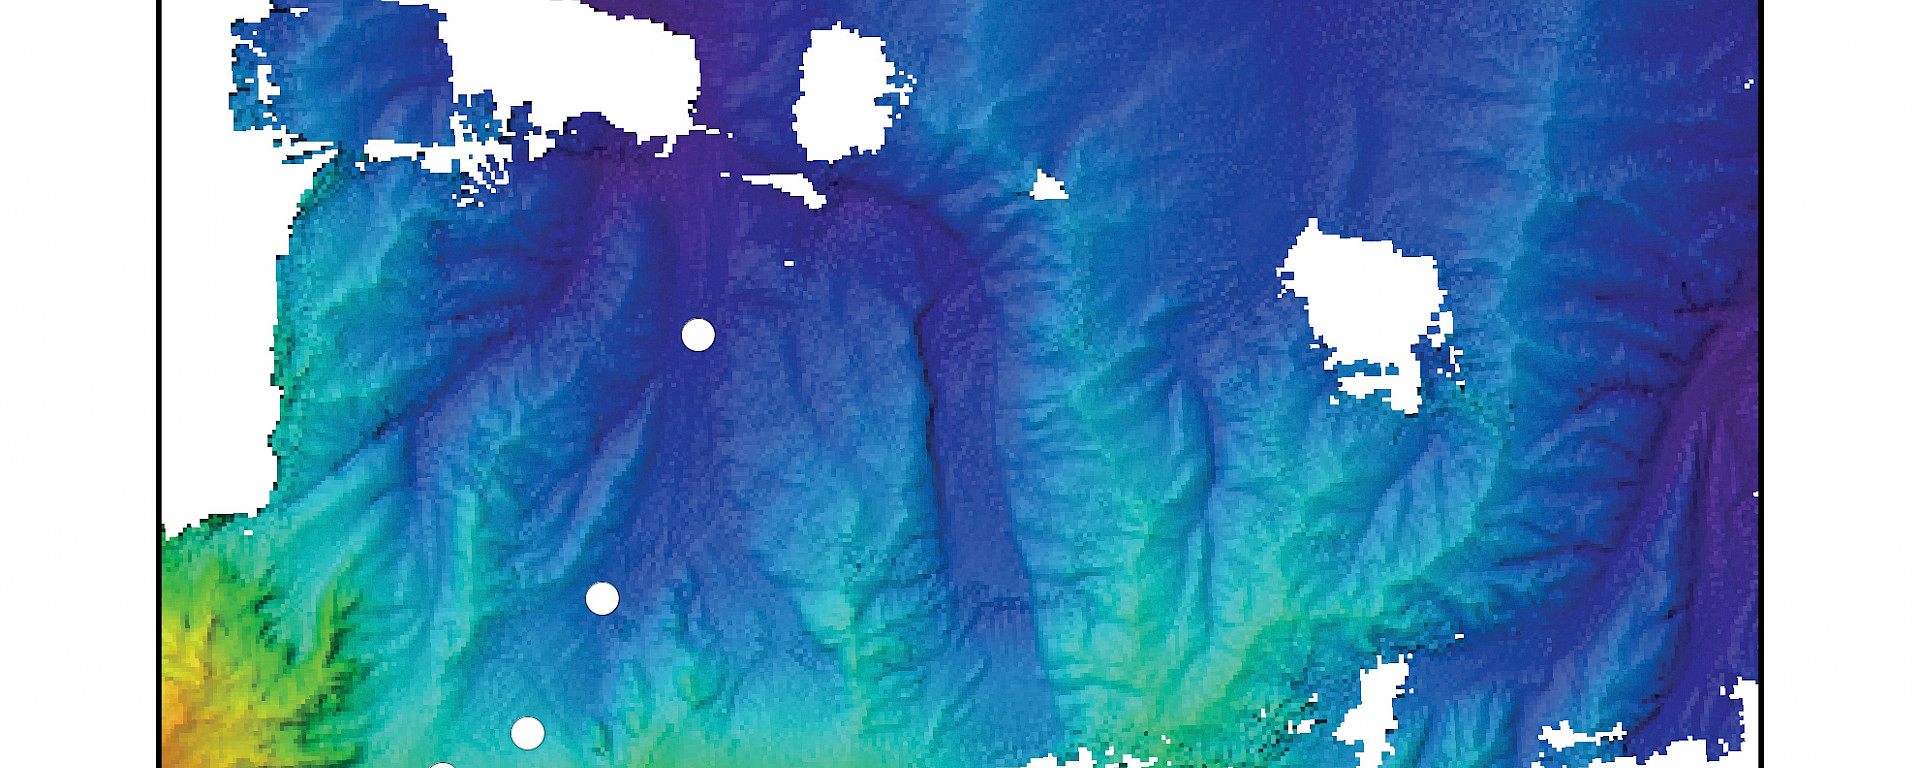 A 90km-wide plan view of the 3D seascape in the CEAMARC study area.